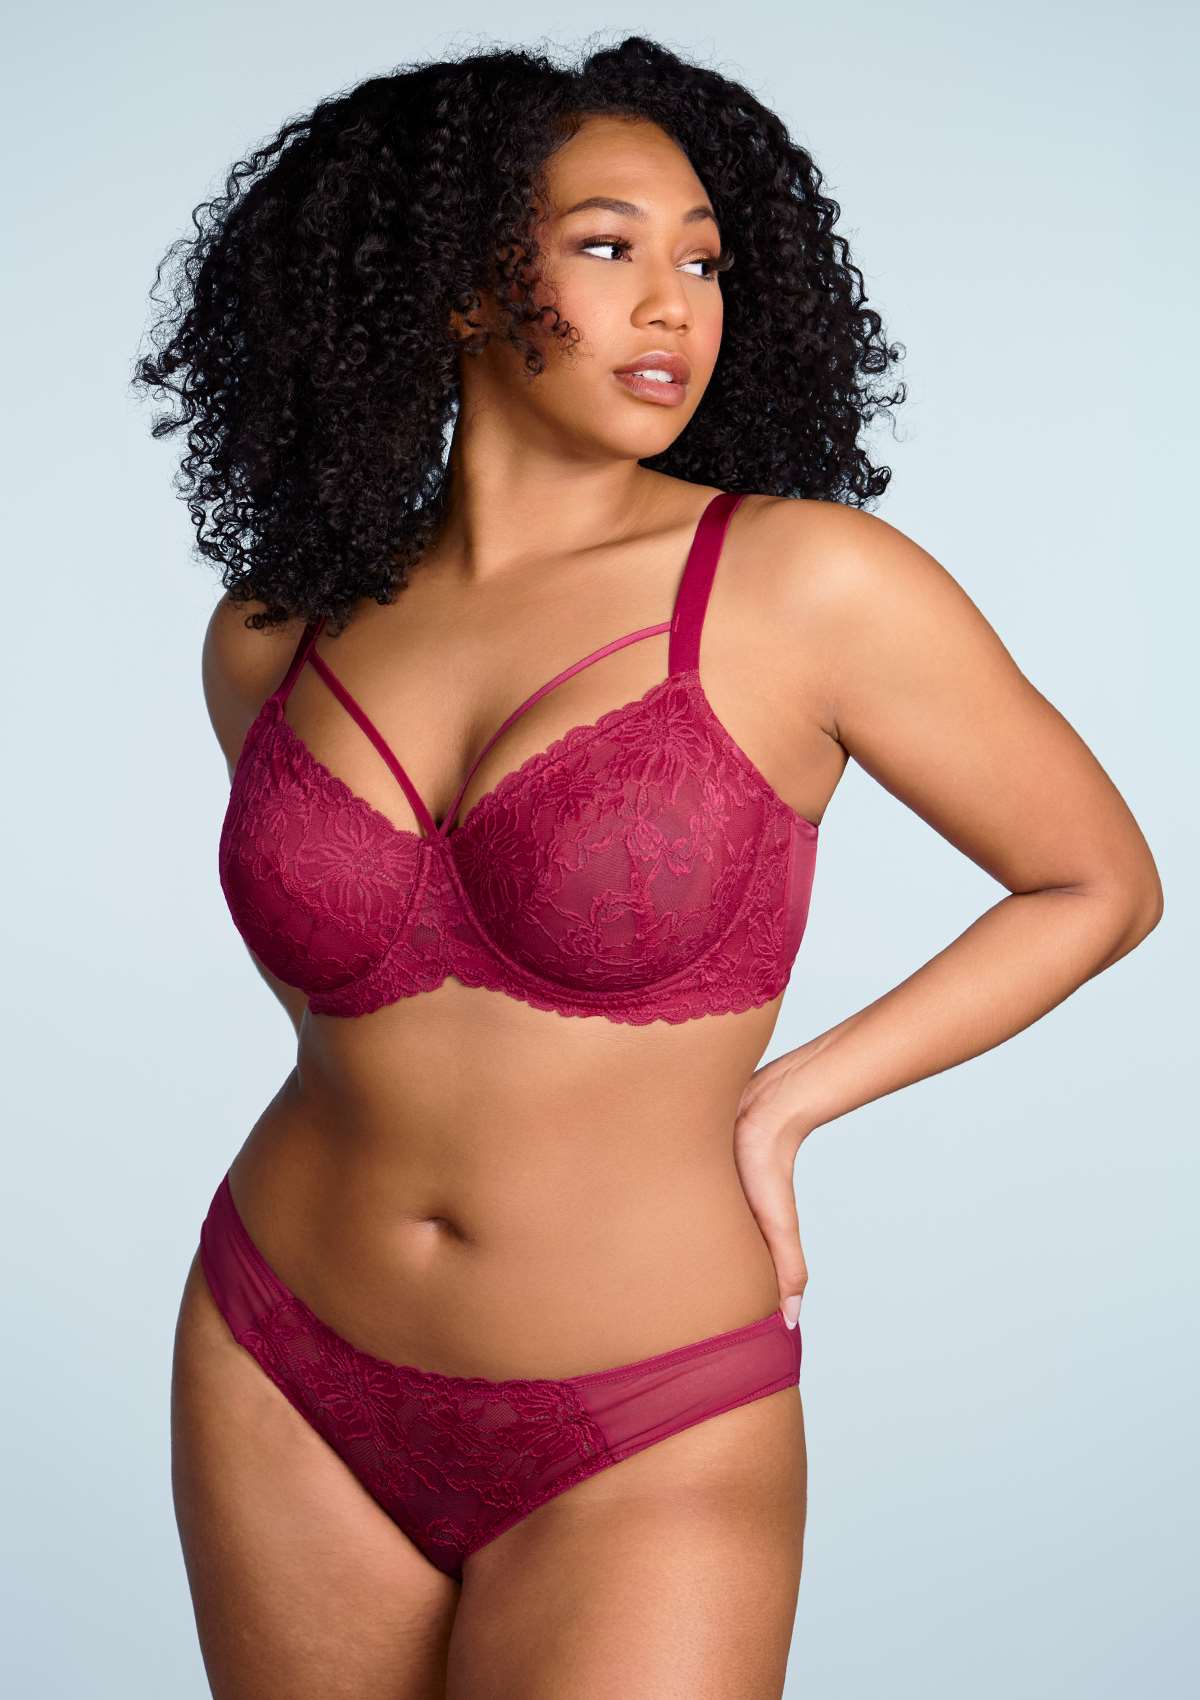 HSIA Pretty In Petals Lace Panties And Bra Set: Plus Size Women Bra - Red / 44 / DDD/F